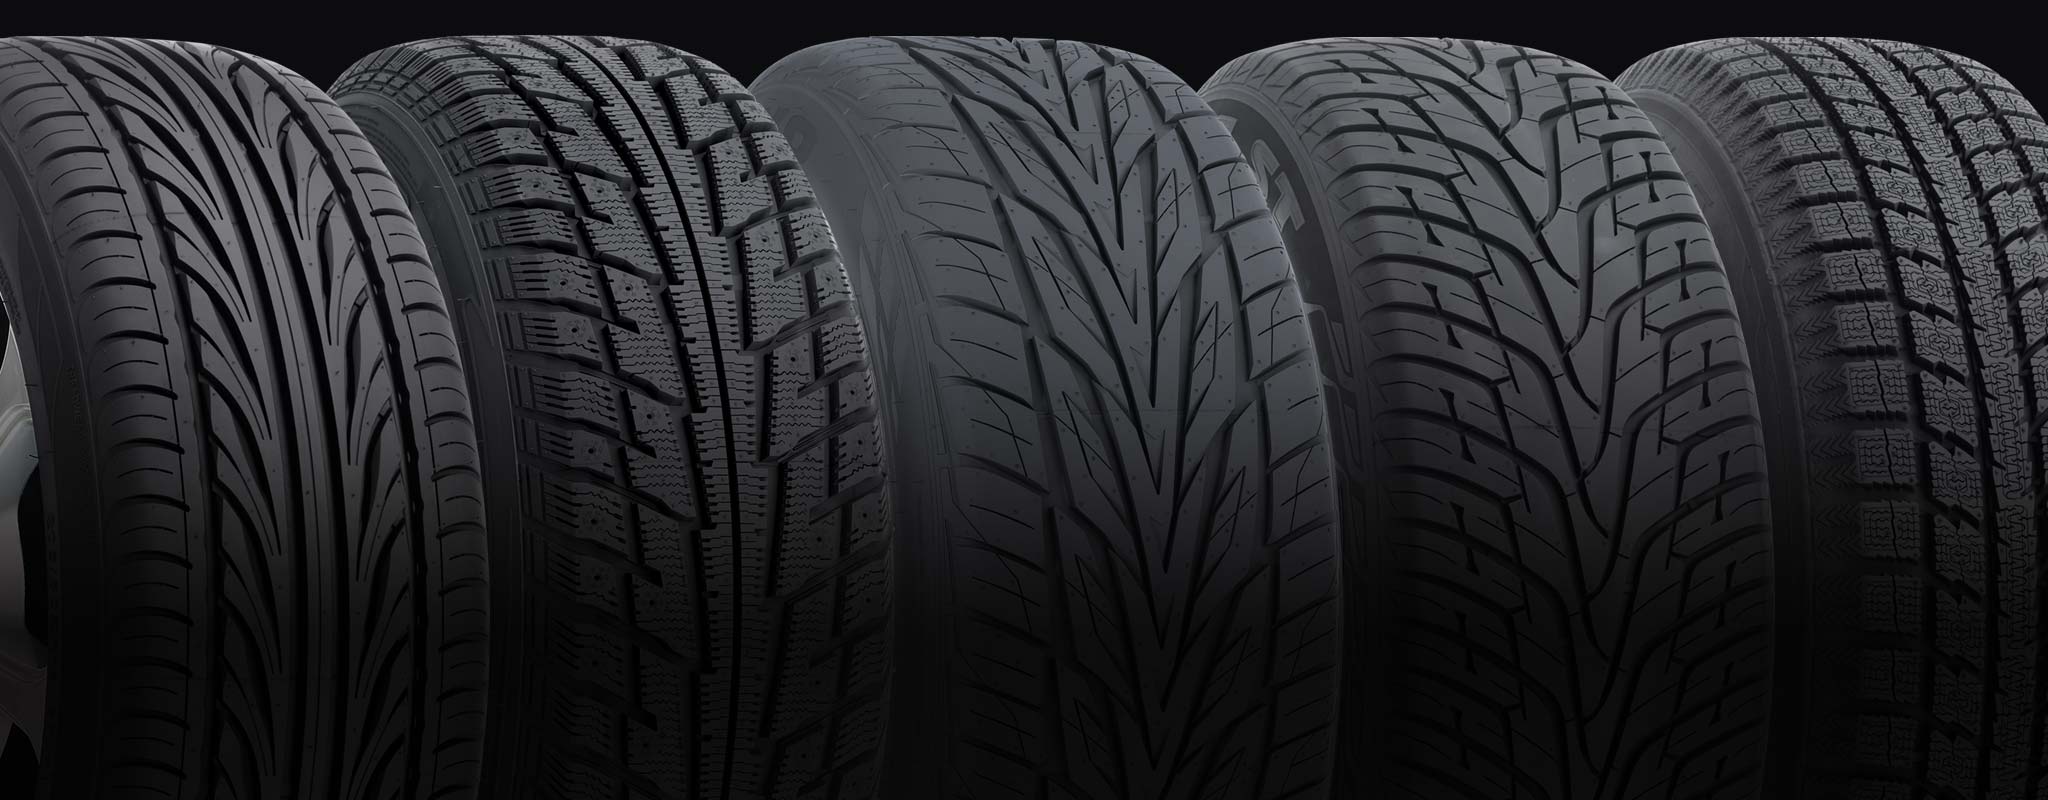 A set of directional tires with different tread designs lined up.